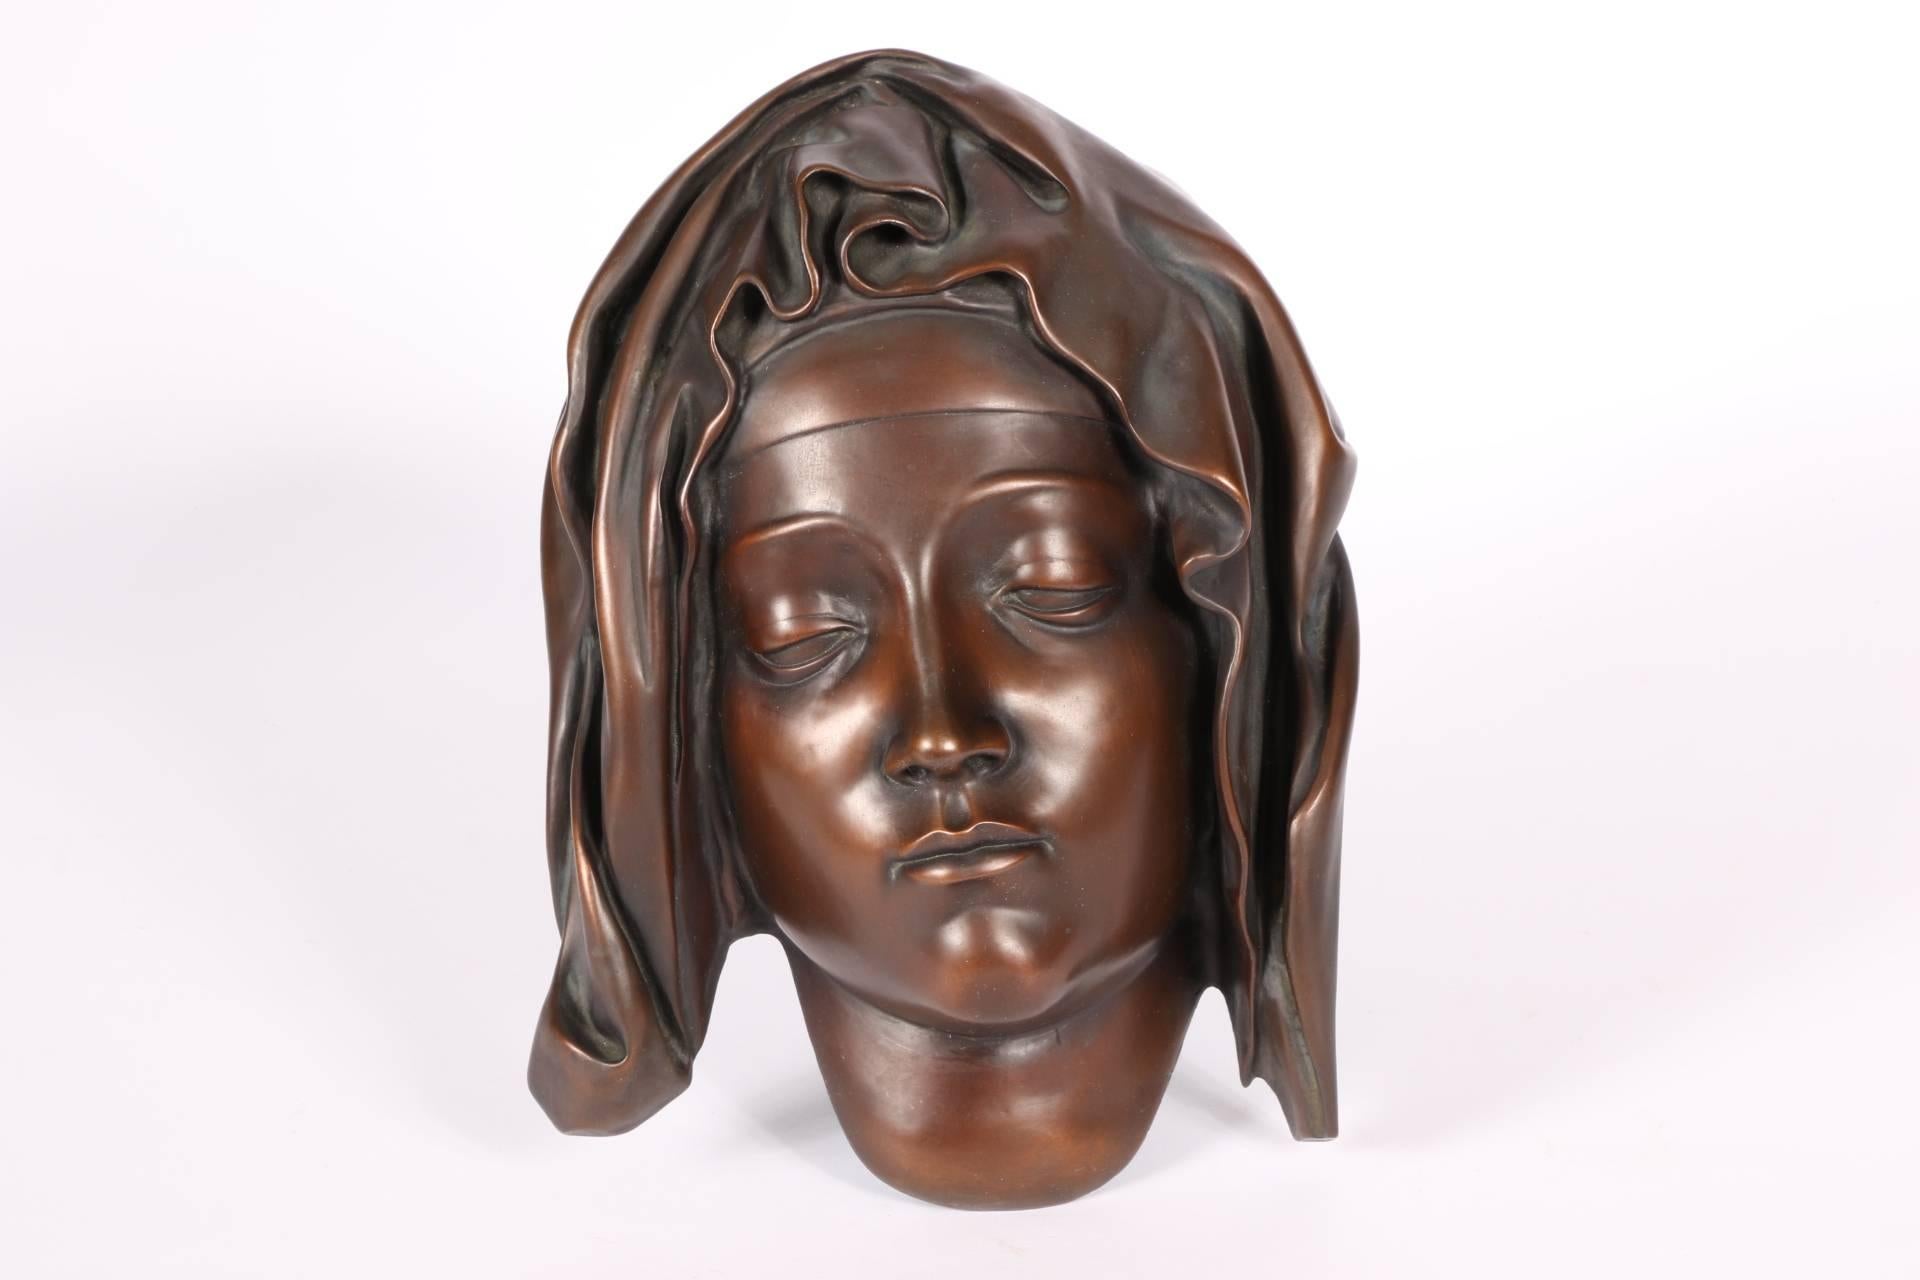 Hollow cast bronze in a red/brown finish. The Virgin with a somber expression, wearing a head scarf with elaborate folds. Reminiscent of Mary in the marble group of the Pieta in the Vatican, Rome. With loops and wire for suspension on the back.